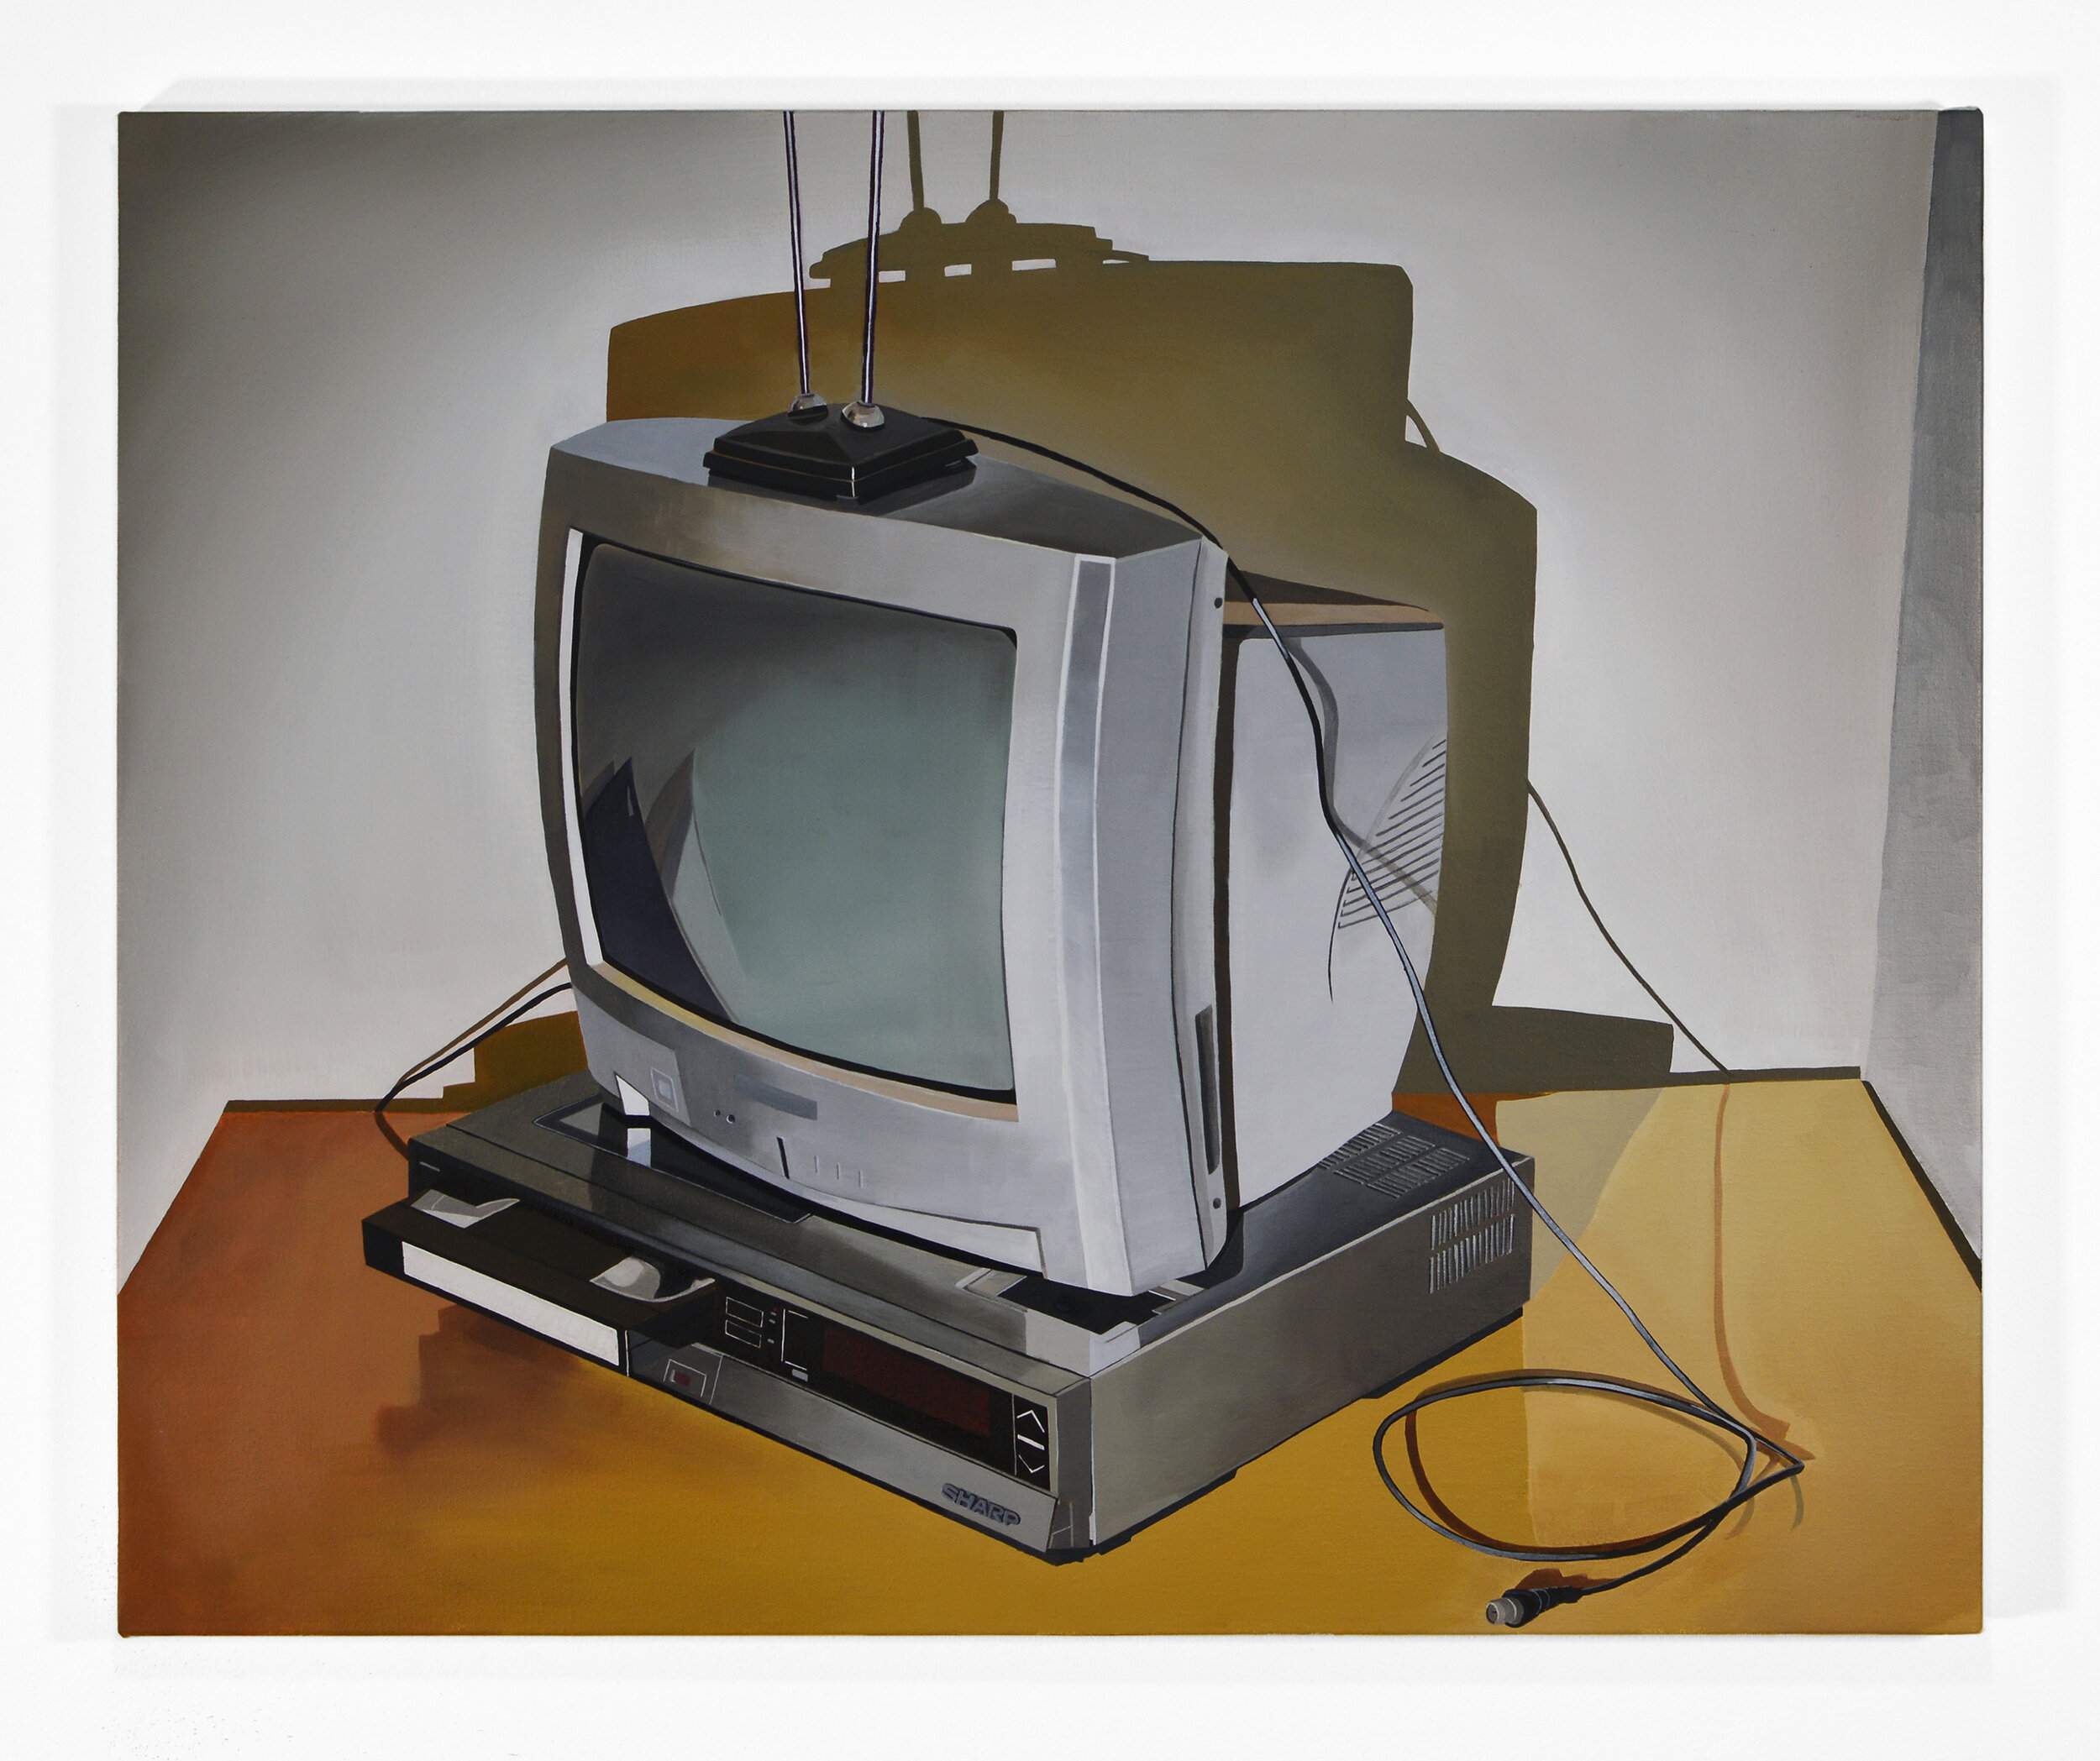  Remember this? (Television, TV Aerial, VHS Player) (2019)  Oil on linen  50 x 60cm  Private Collection 